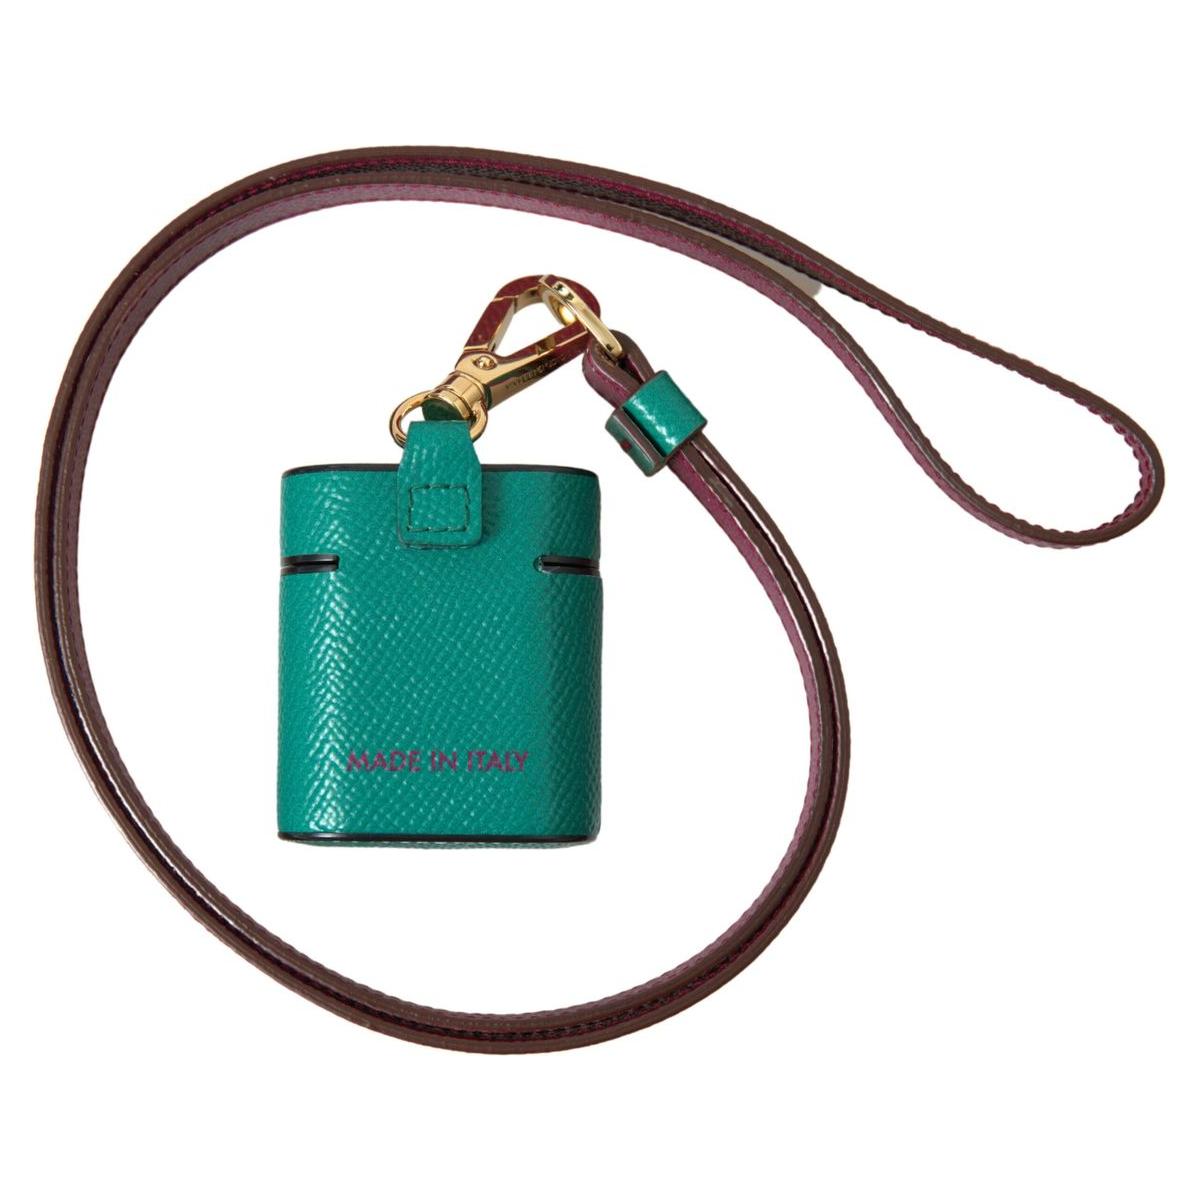 Dolce & Gabbana Elegant Leather Airpods Case in Green and Maroon green-maroon-calf-leather-logo-print-strap-airpods-case